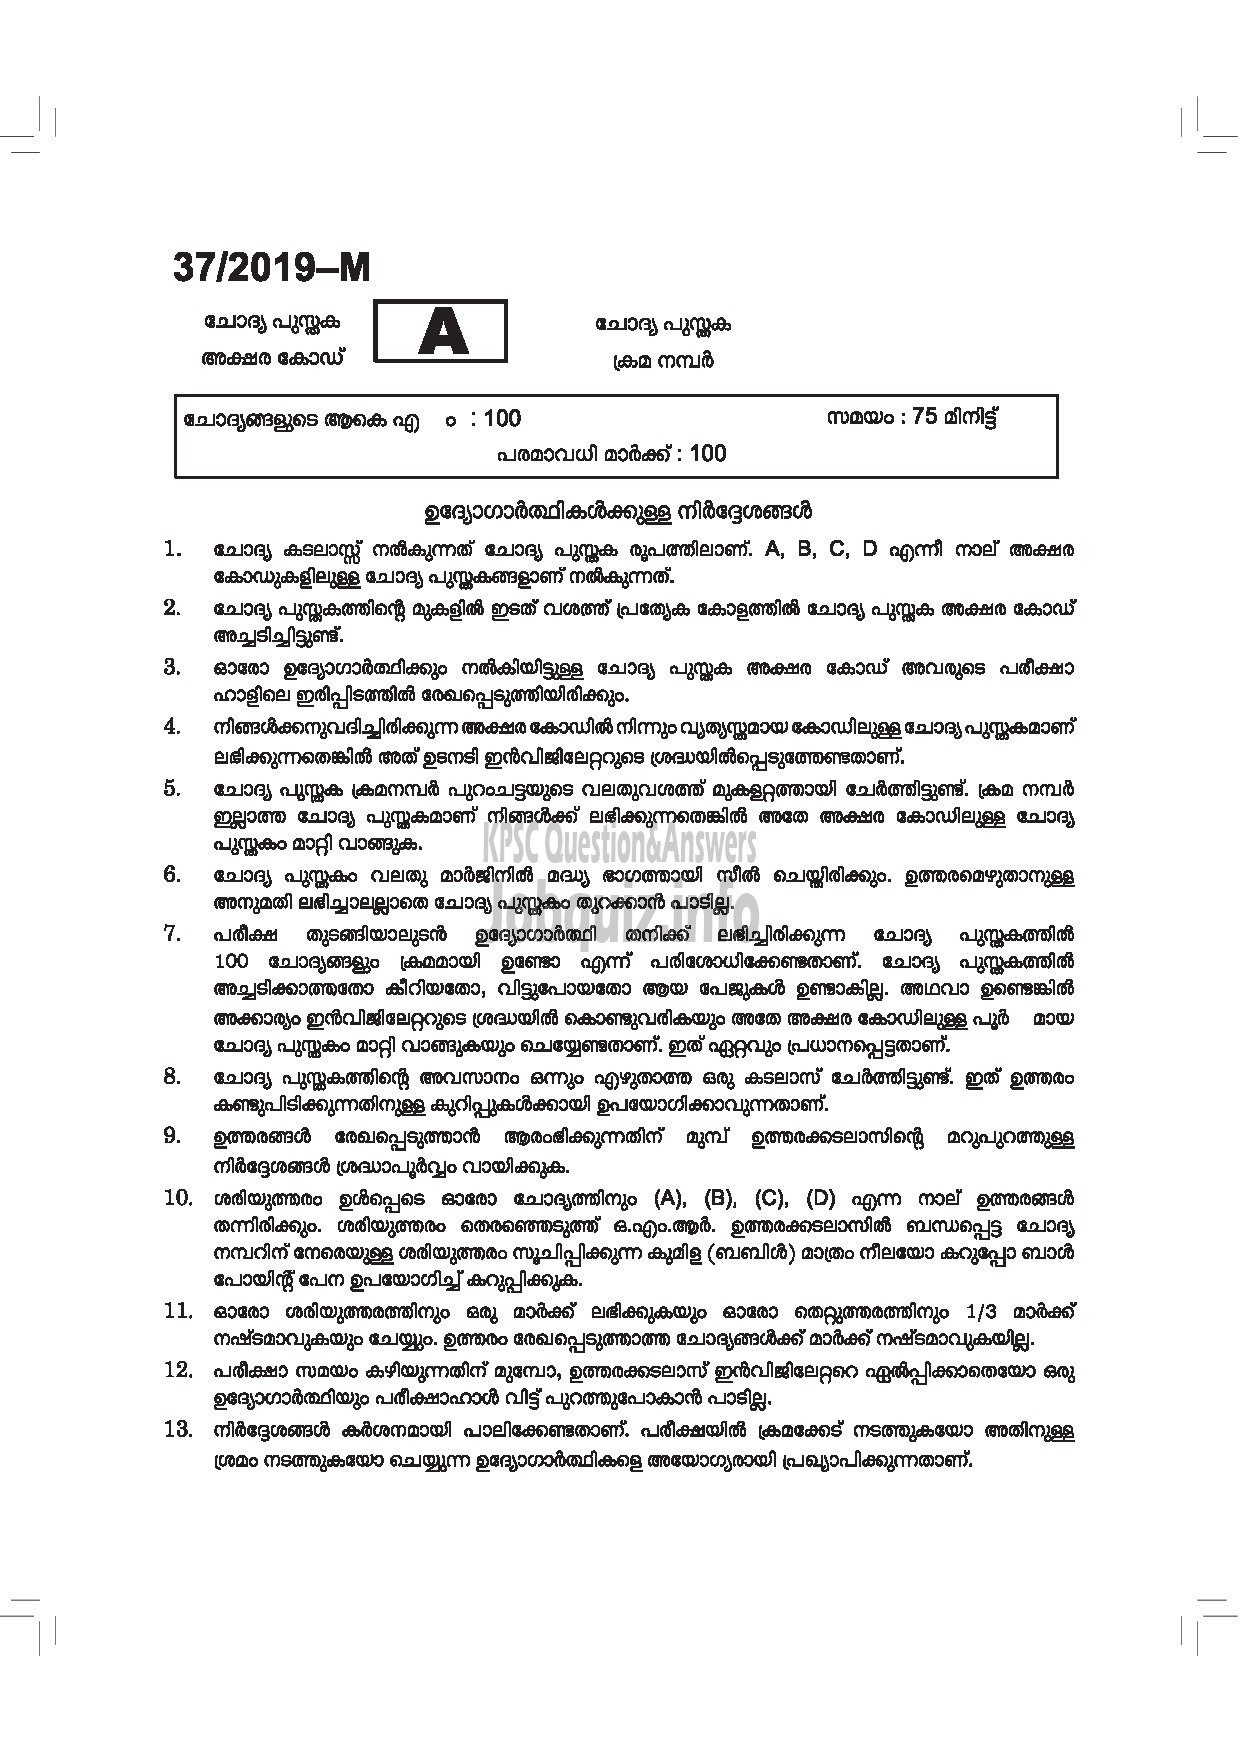 Kerala PSC Question Paper - DRIVER CUM OFFICE ATTENDANT / POLICE CONSTABLE DRIVER GOVT OWNED COMP / CORP / BOARD / POLICE MALAYALAM -1